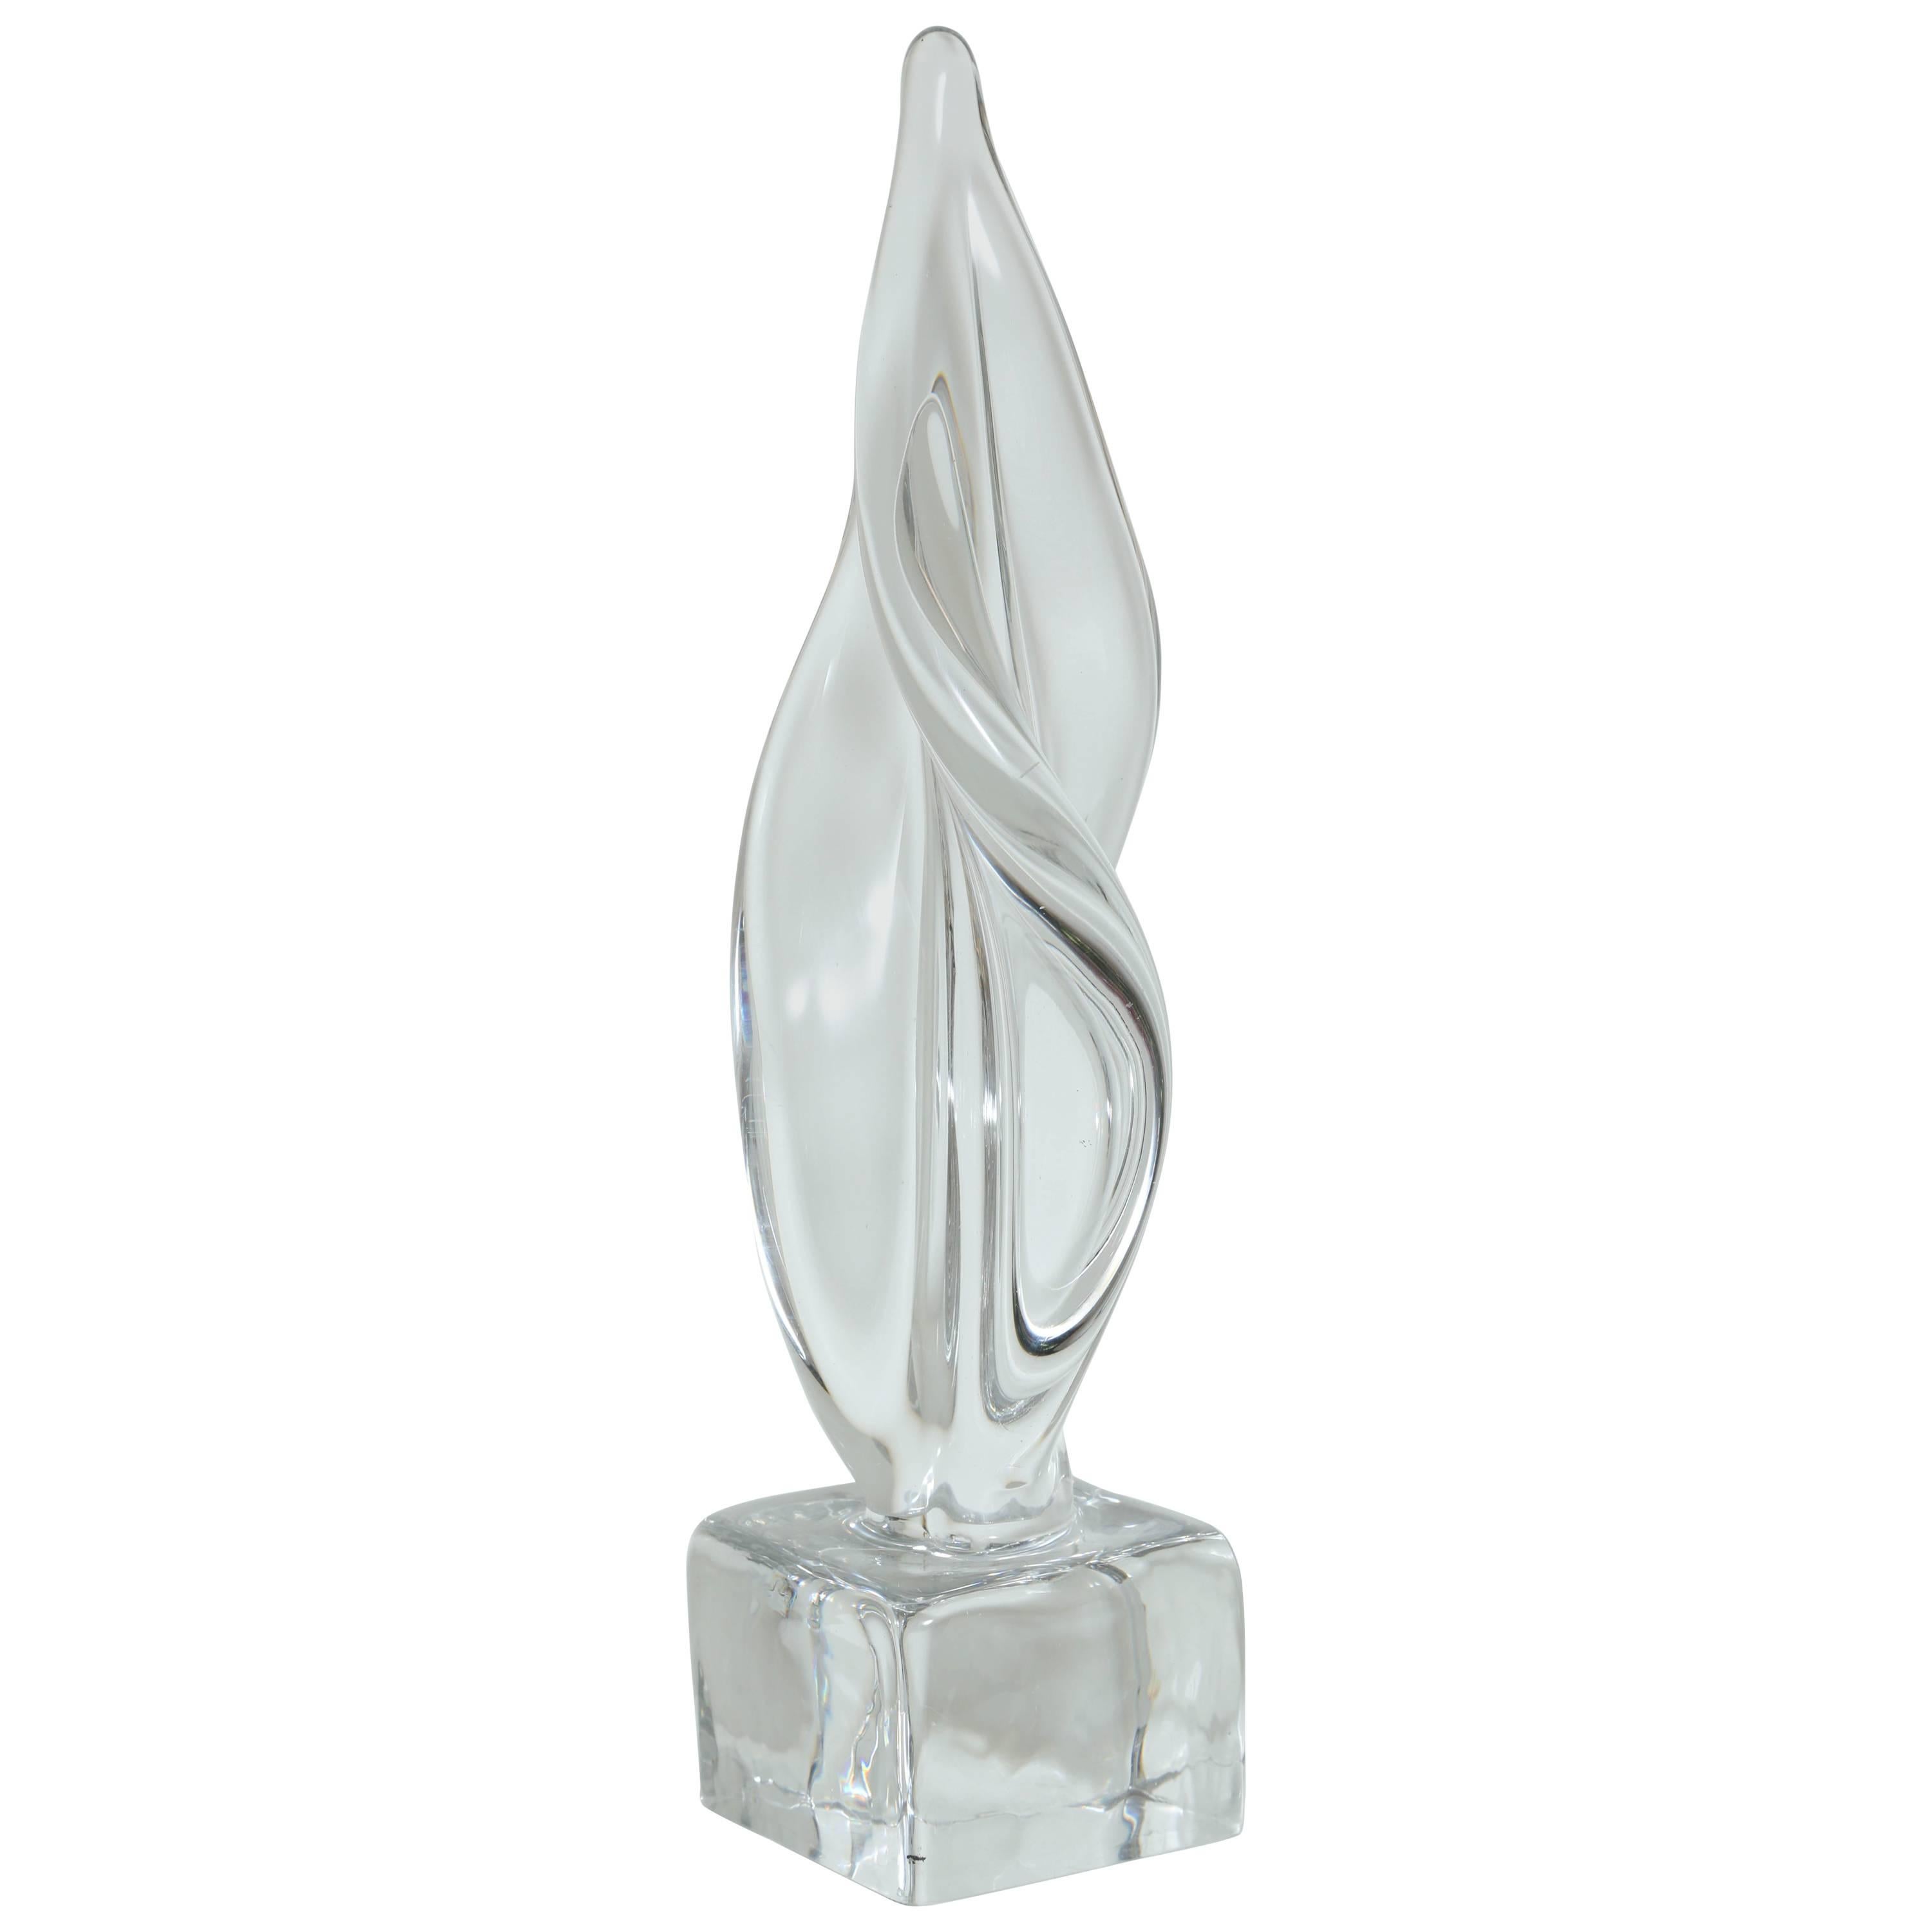 Mid-Century Modern large abstract sculpture in hand blown clear cast Murano glass. Sculpture has spiral form with amorphous design reminiscent of a fire flame, and features square solid glass pedestal base.